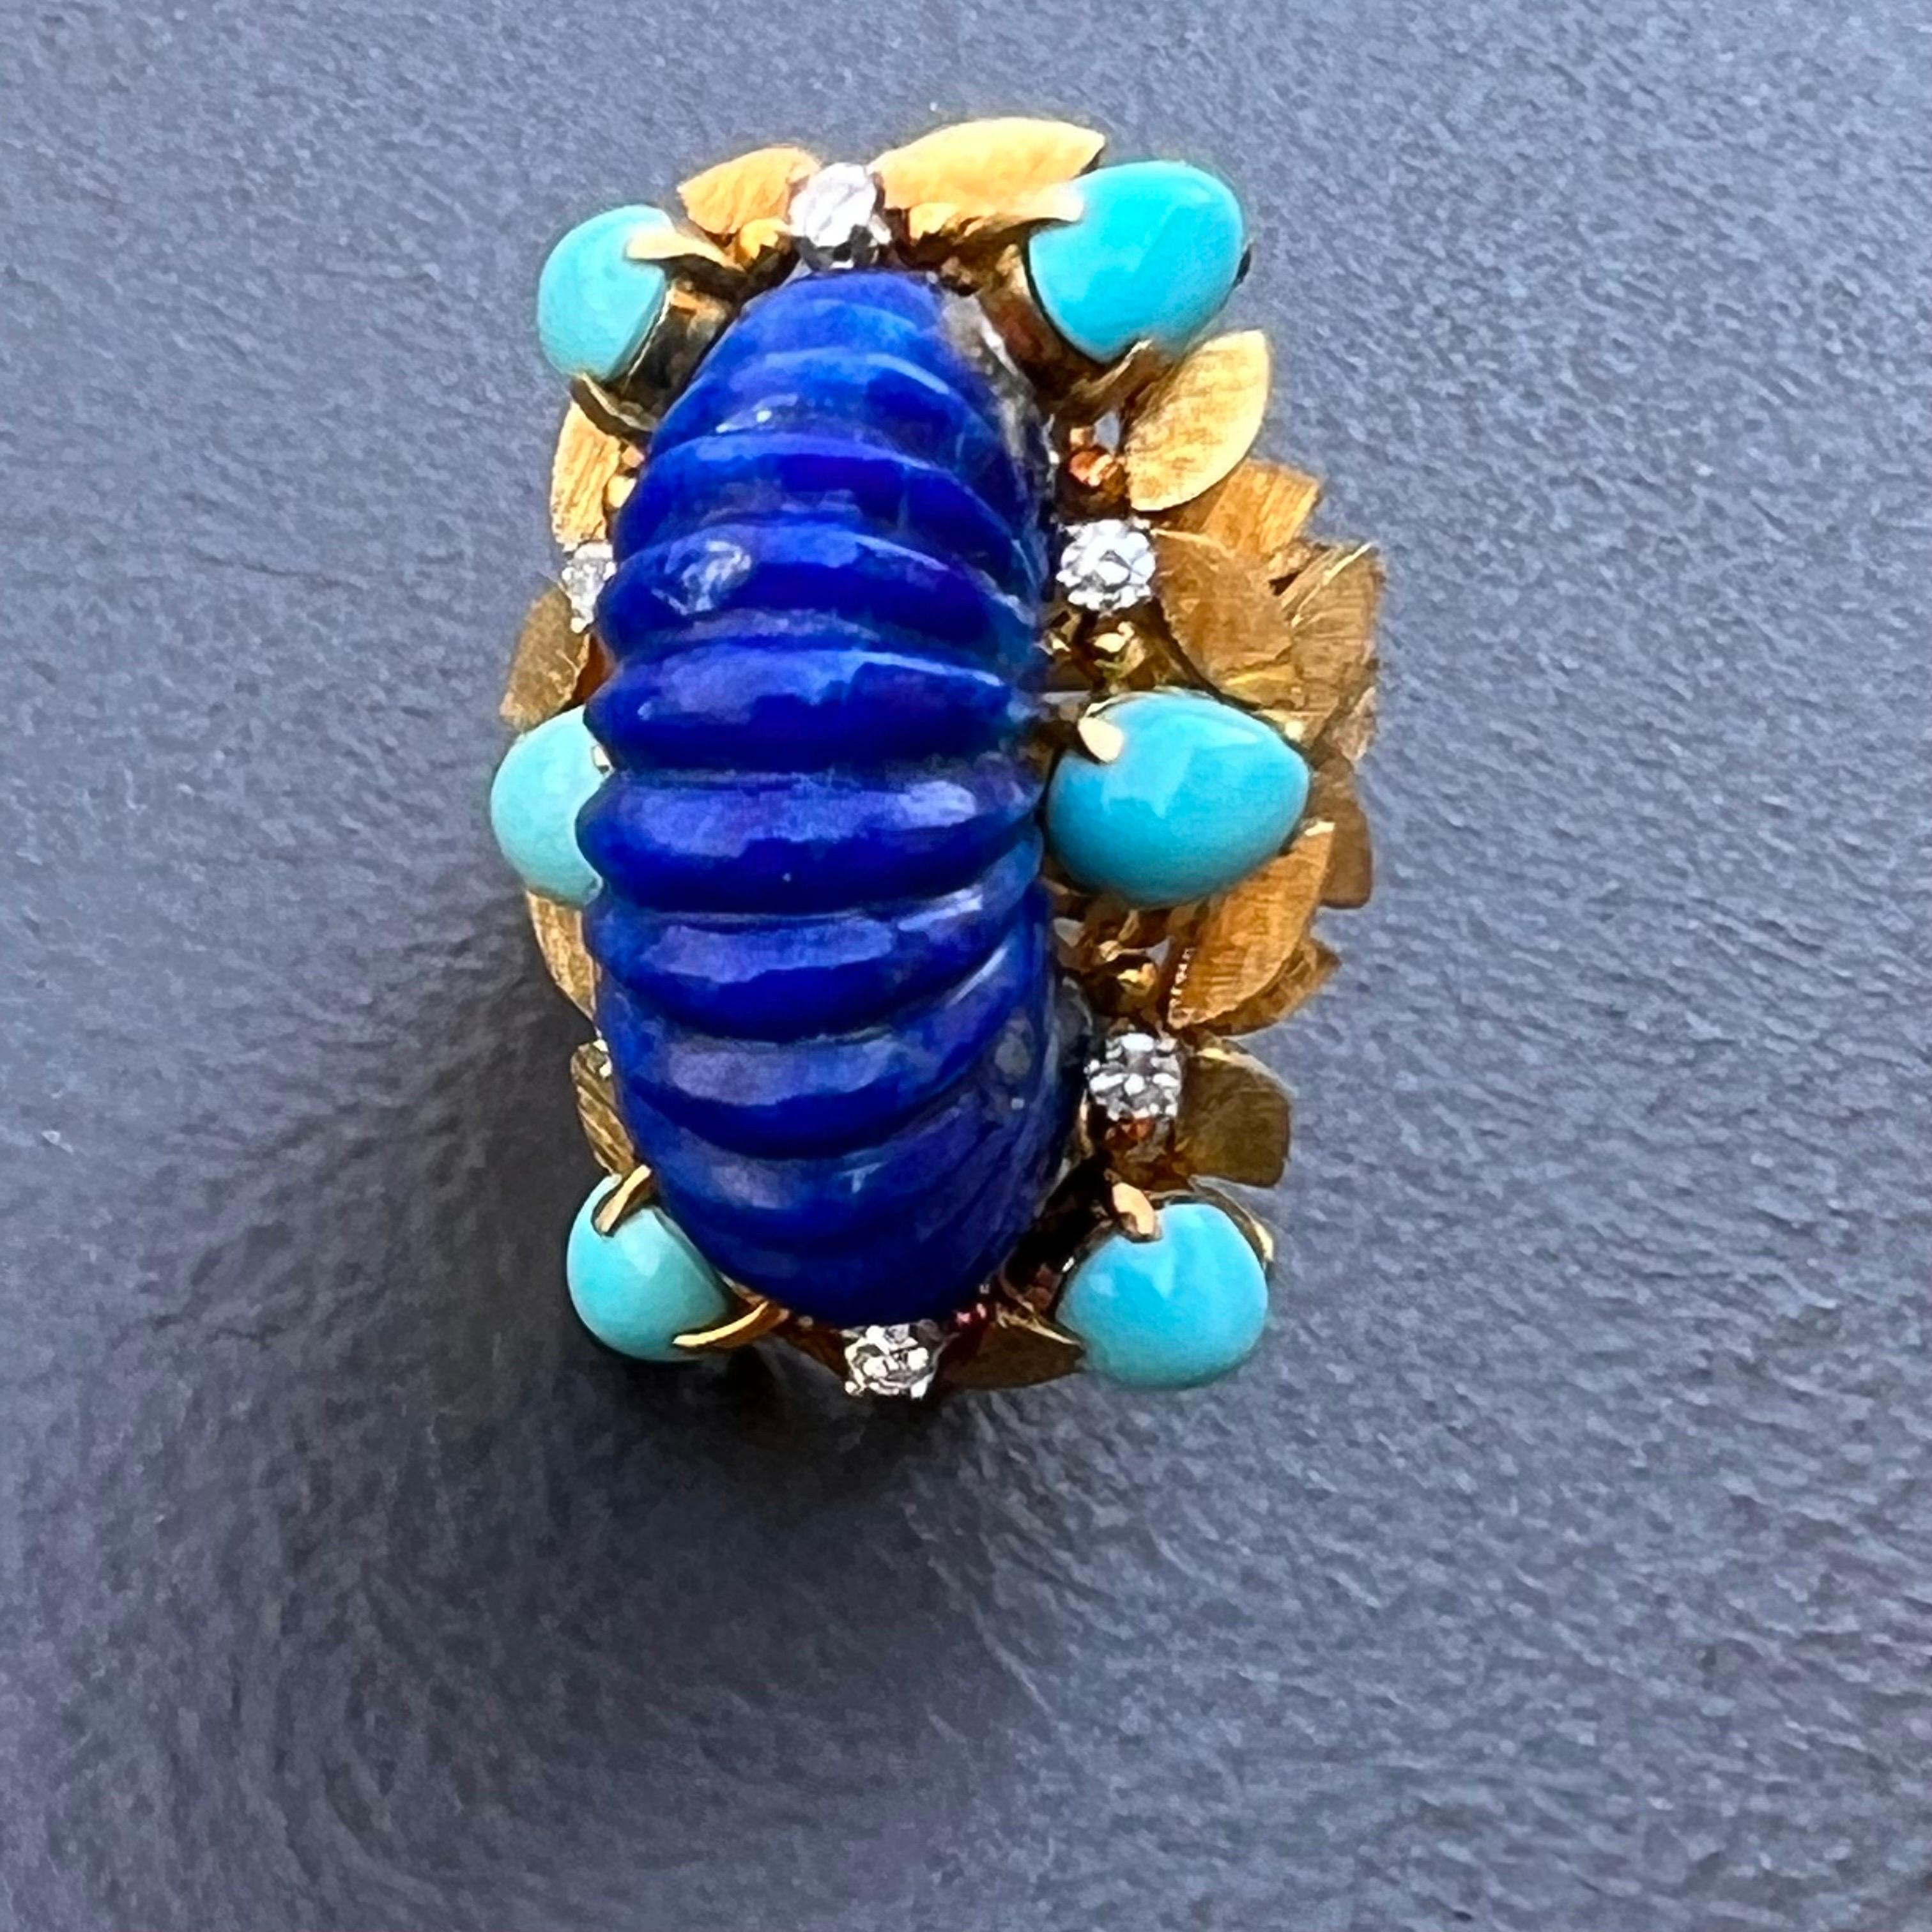 1970's Spectacular cocktail ring  featuring  a huge carved lapis lazuli cabochon central stone surrounded by teardrop shape Persian turquoise and round brilliant diamonds . There are total of 6 prong set turquoise and 6 diamonds which are set on an